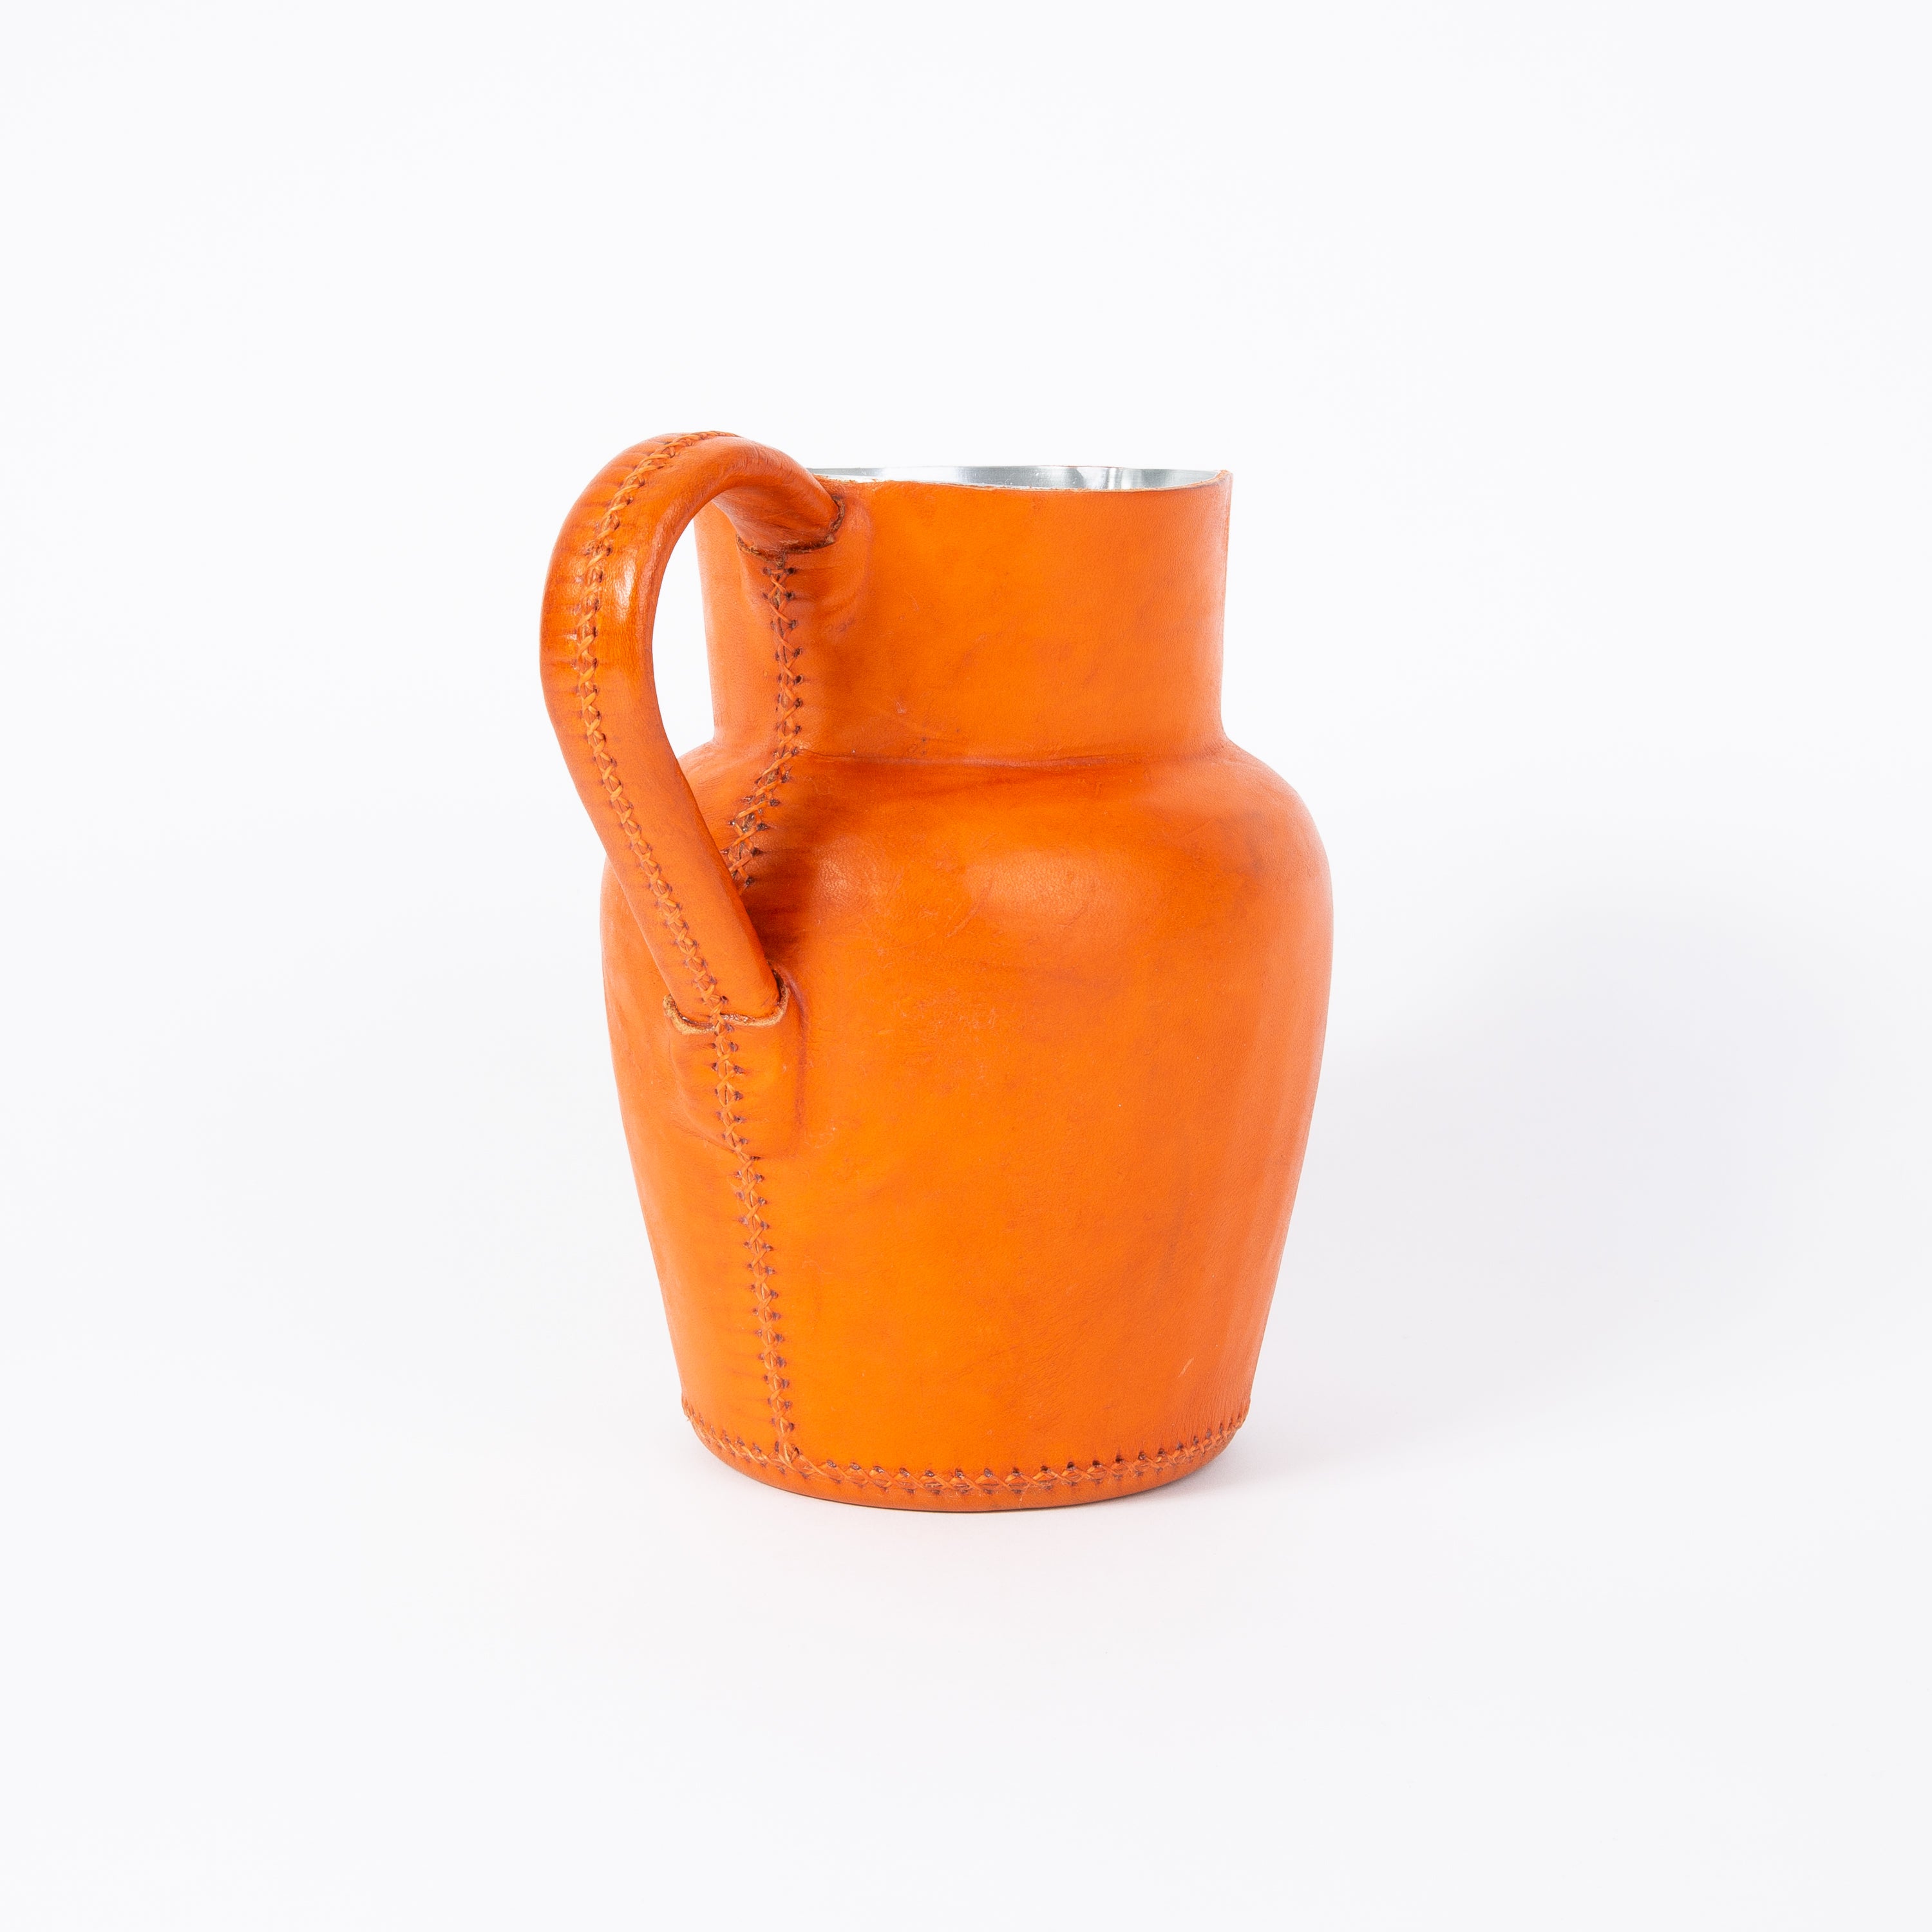 Orange Leather Carafe | Leather Pitcher | Leather Vase | Leather Home Goods | Home Goods | Home and Garden | Interior Design | Leather Tablewares | Leather Barwares | Leather Accessories | Bati Leather Goods